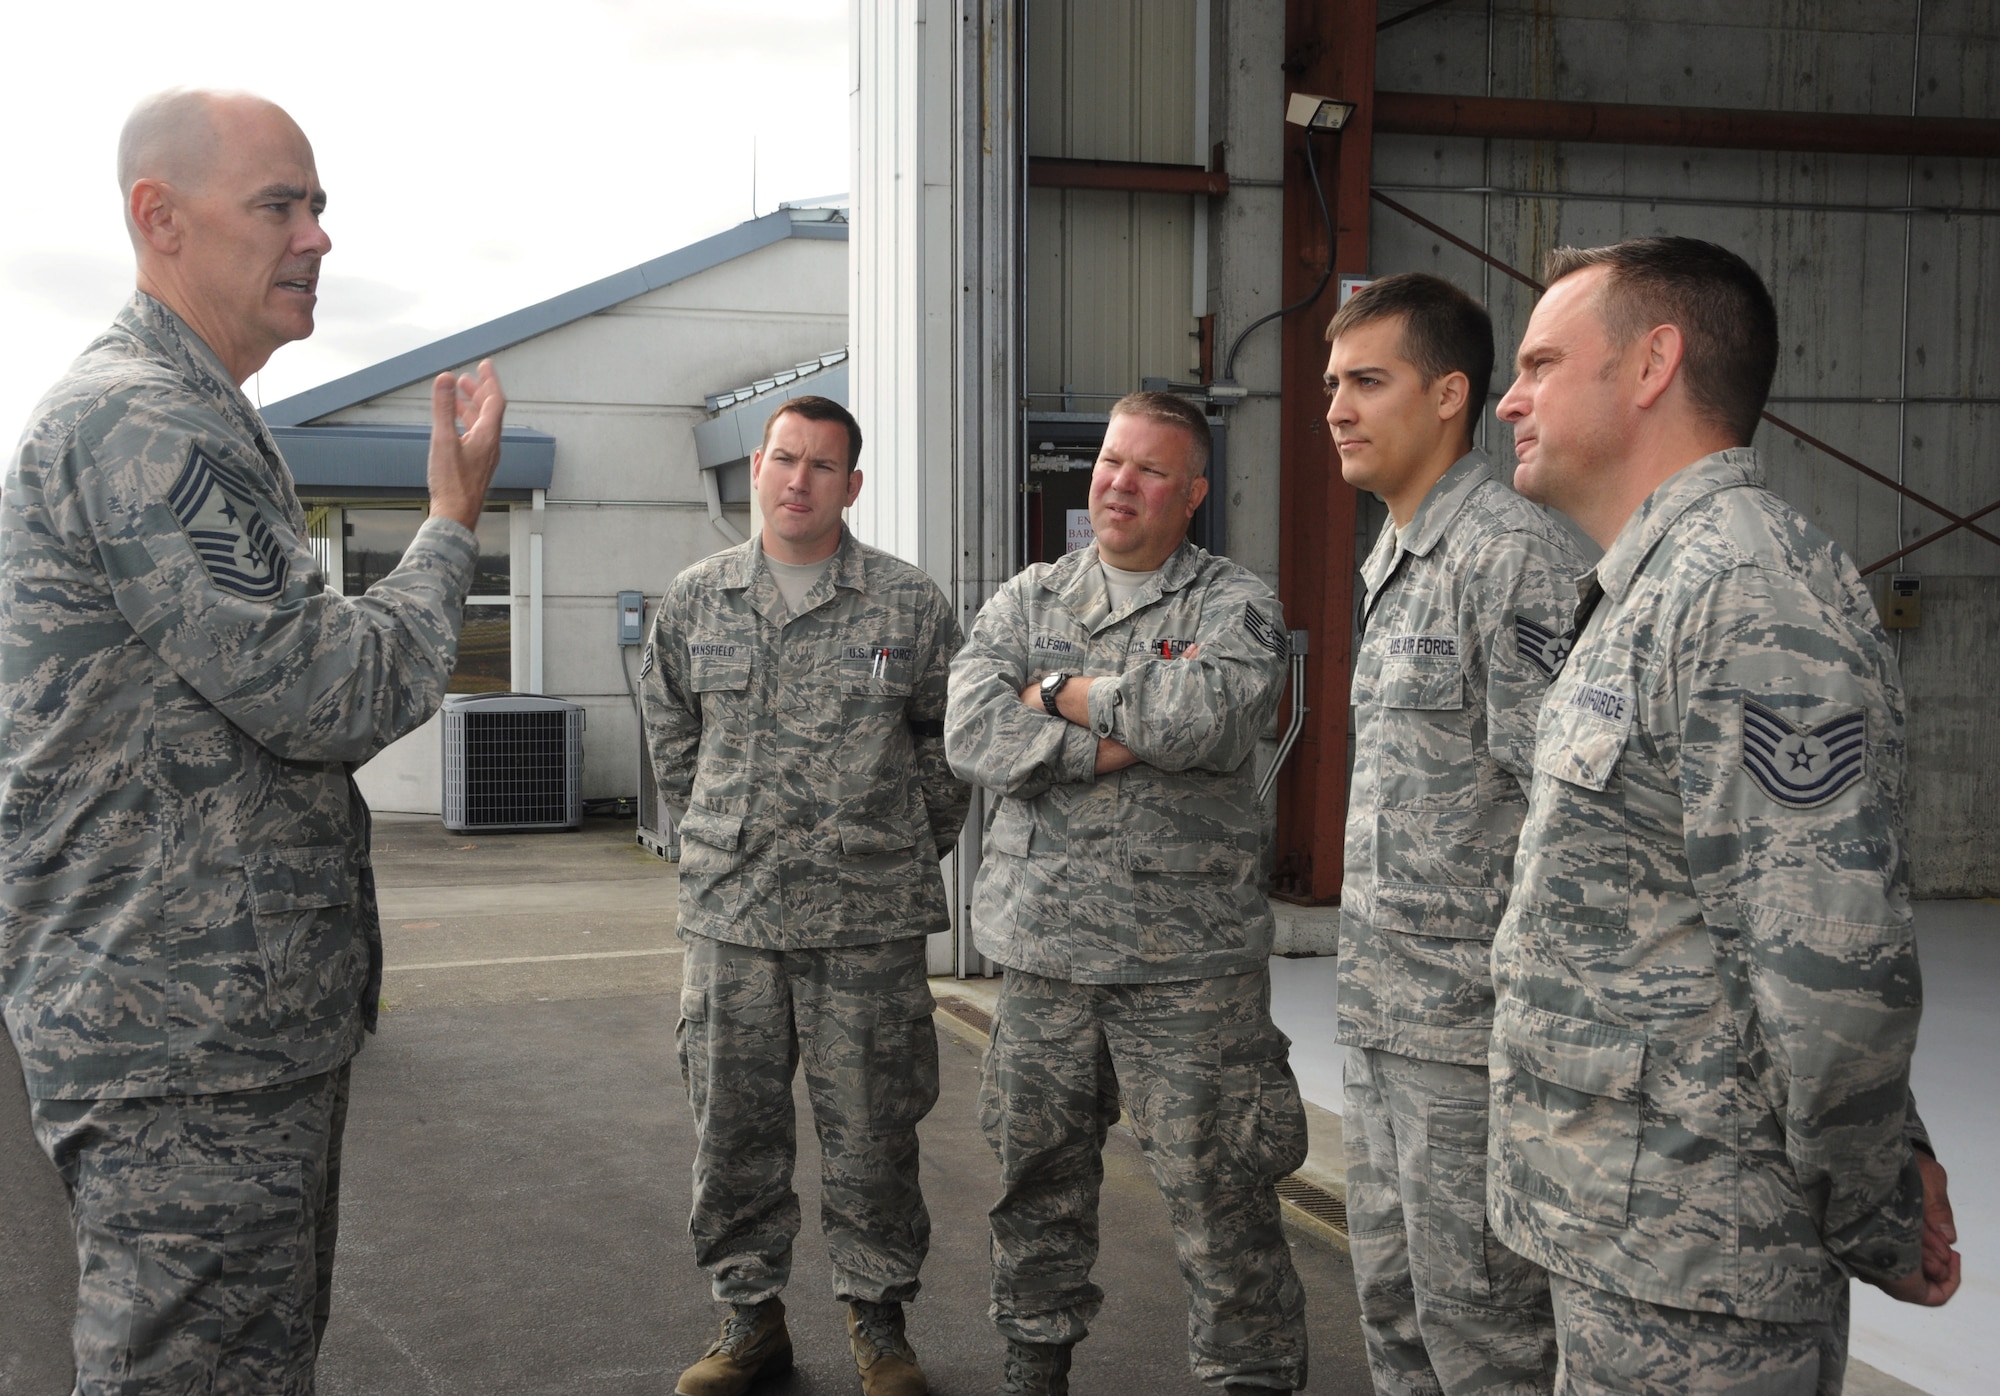 Ronald C. Anderson Jr., Command Chief Master Sgt., 1st Air Force, left, meets with several maintenance Airmen of the 142nd Fighter Wing during his tour of the Portland Air National Guard Base, Ore., June 10, 2014. (Air National Guard photo by Tech. Sgt. John Hughel, 142nd Fighter Wing Public Affairs/Released)